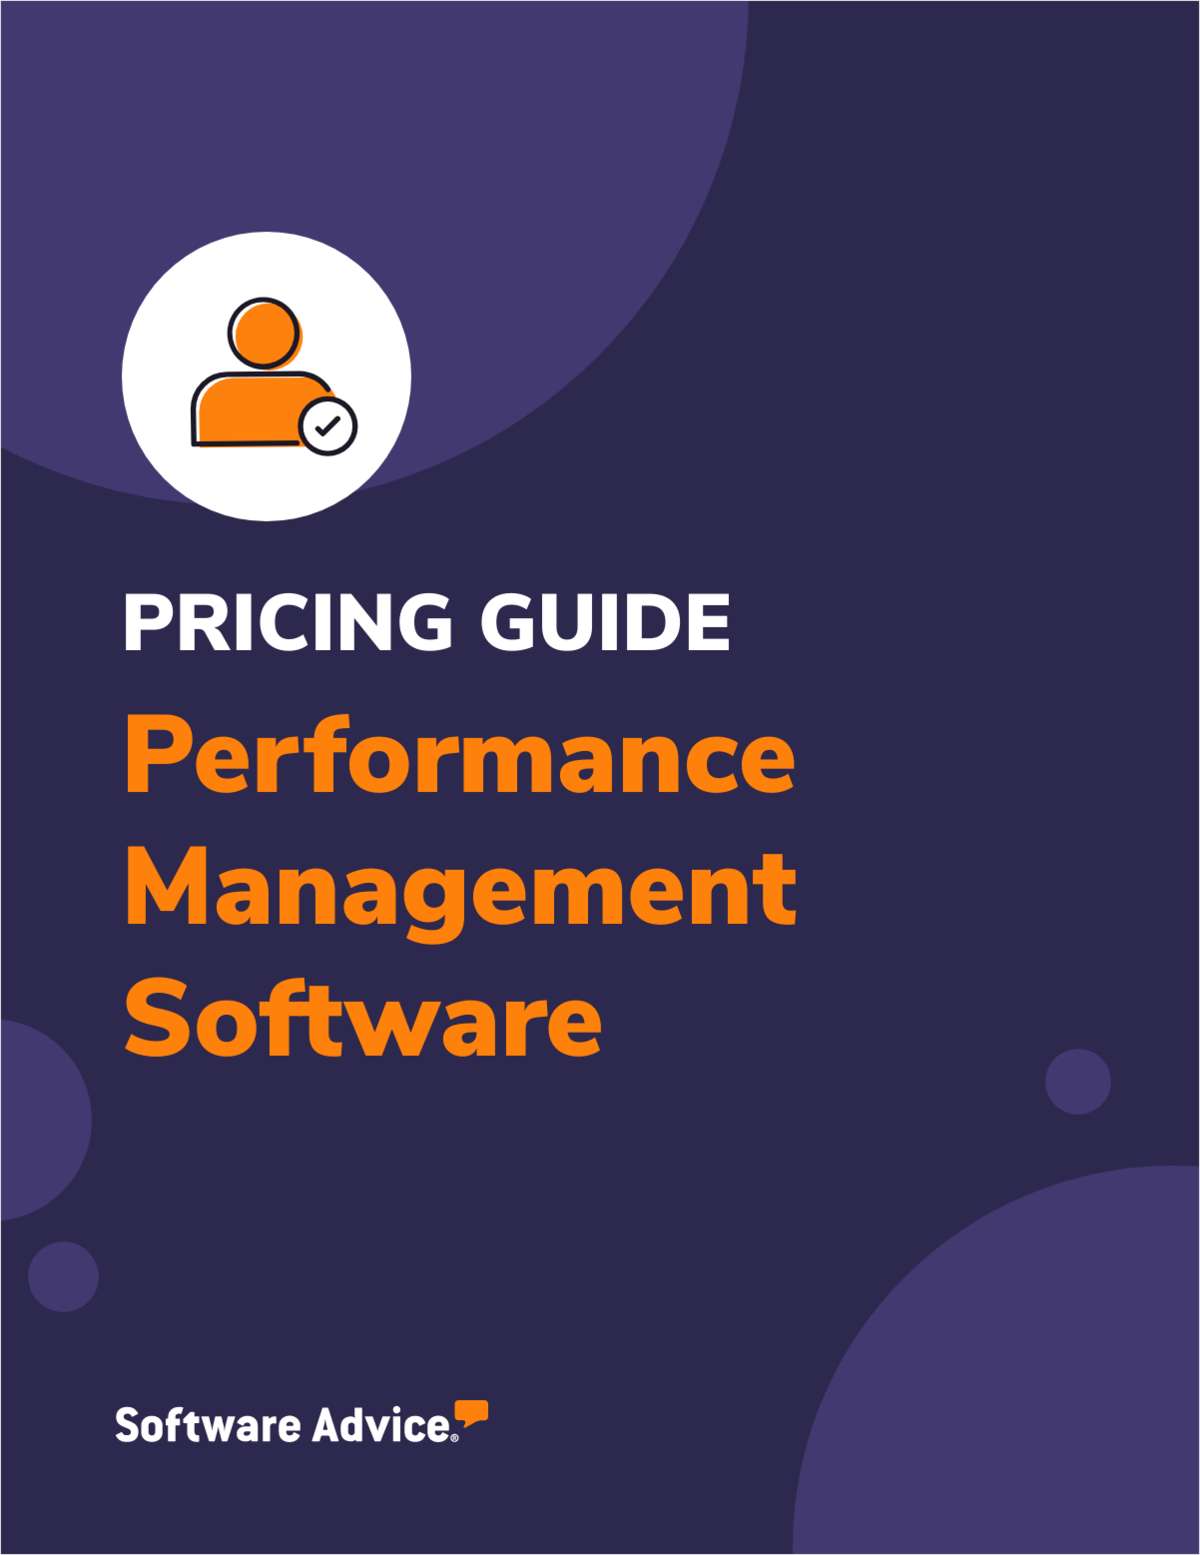 Performance Management Software Pricing Guide